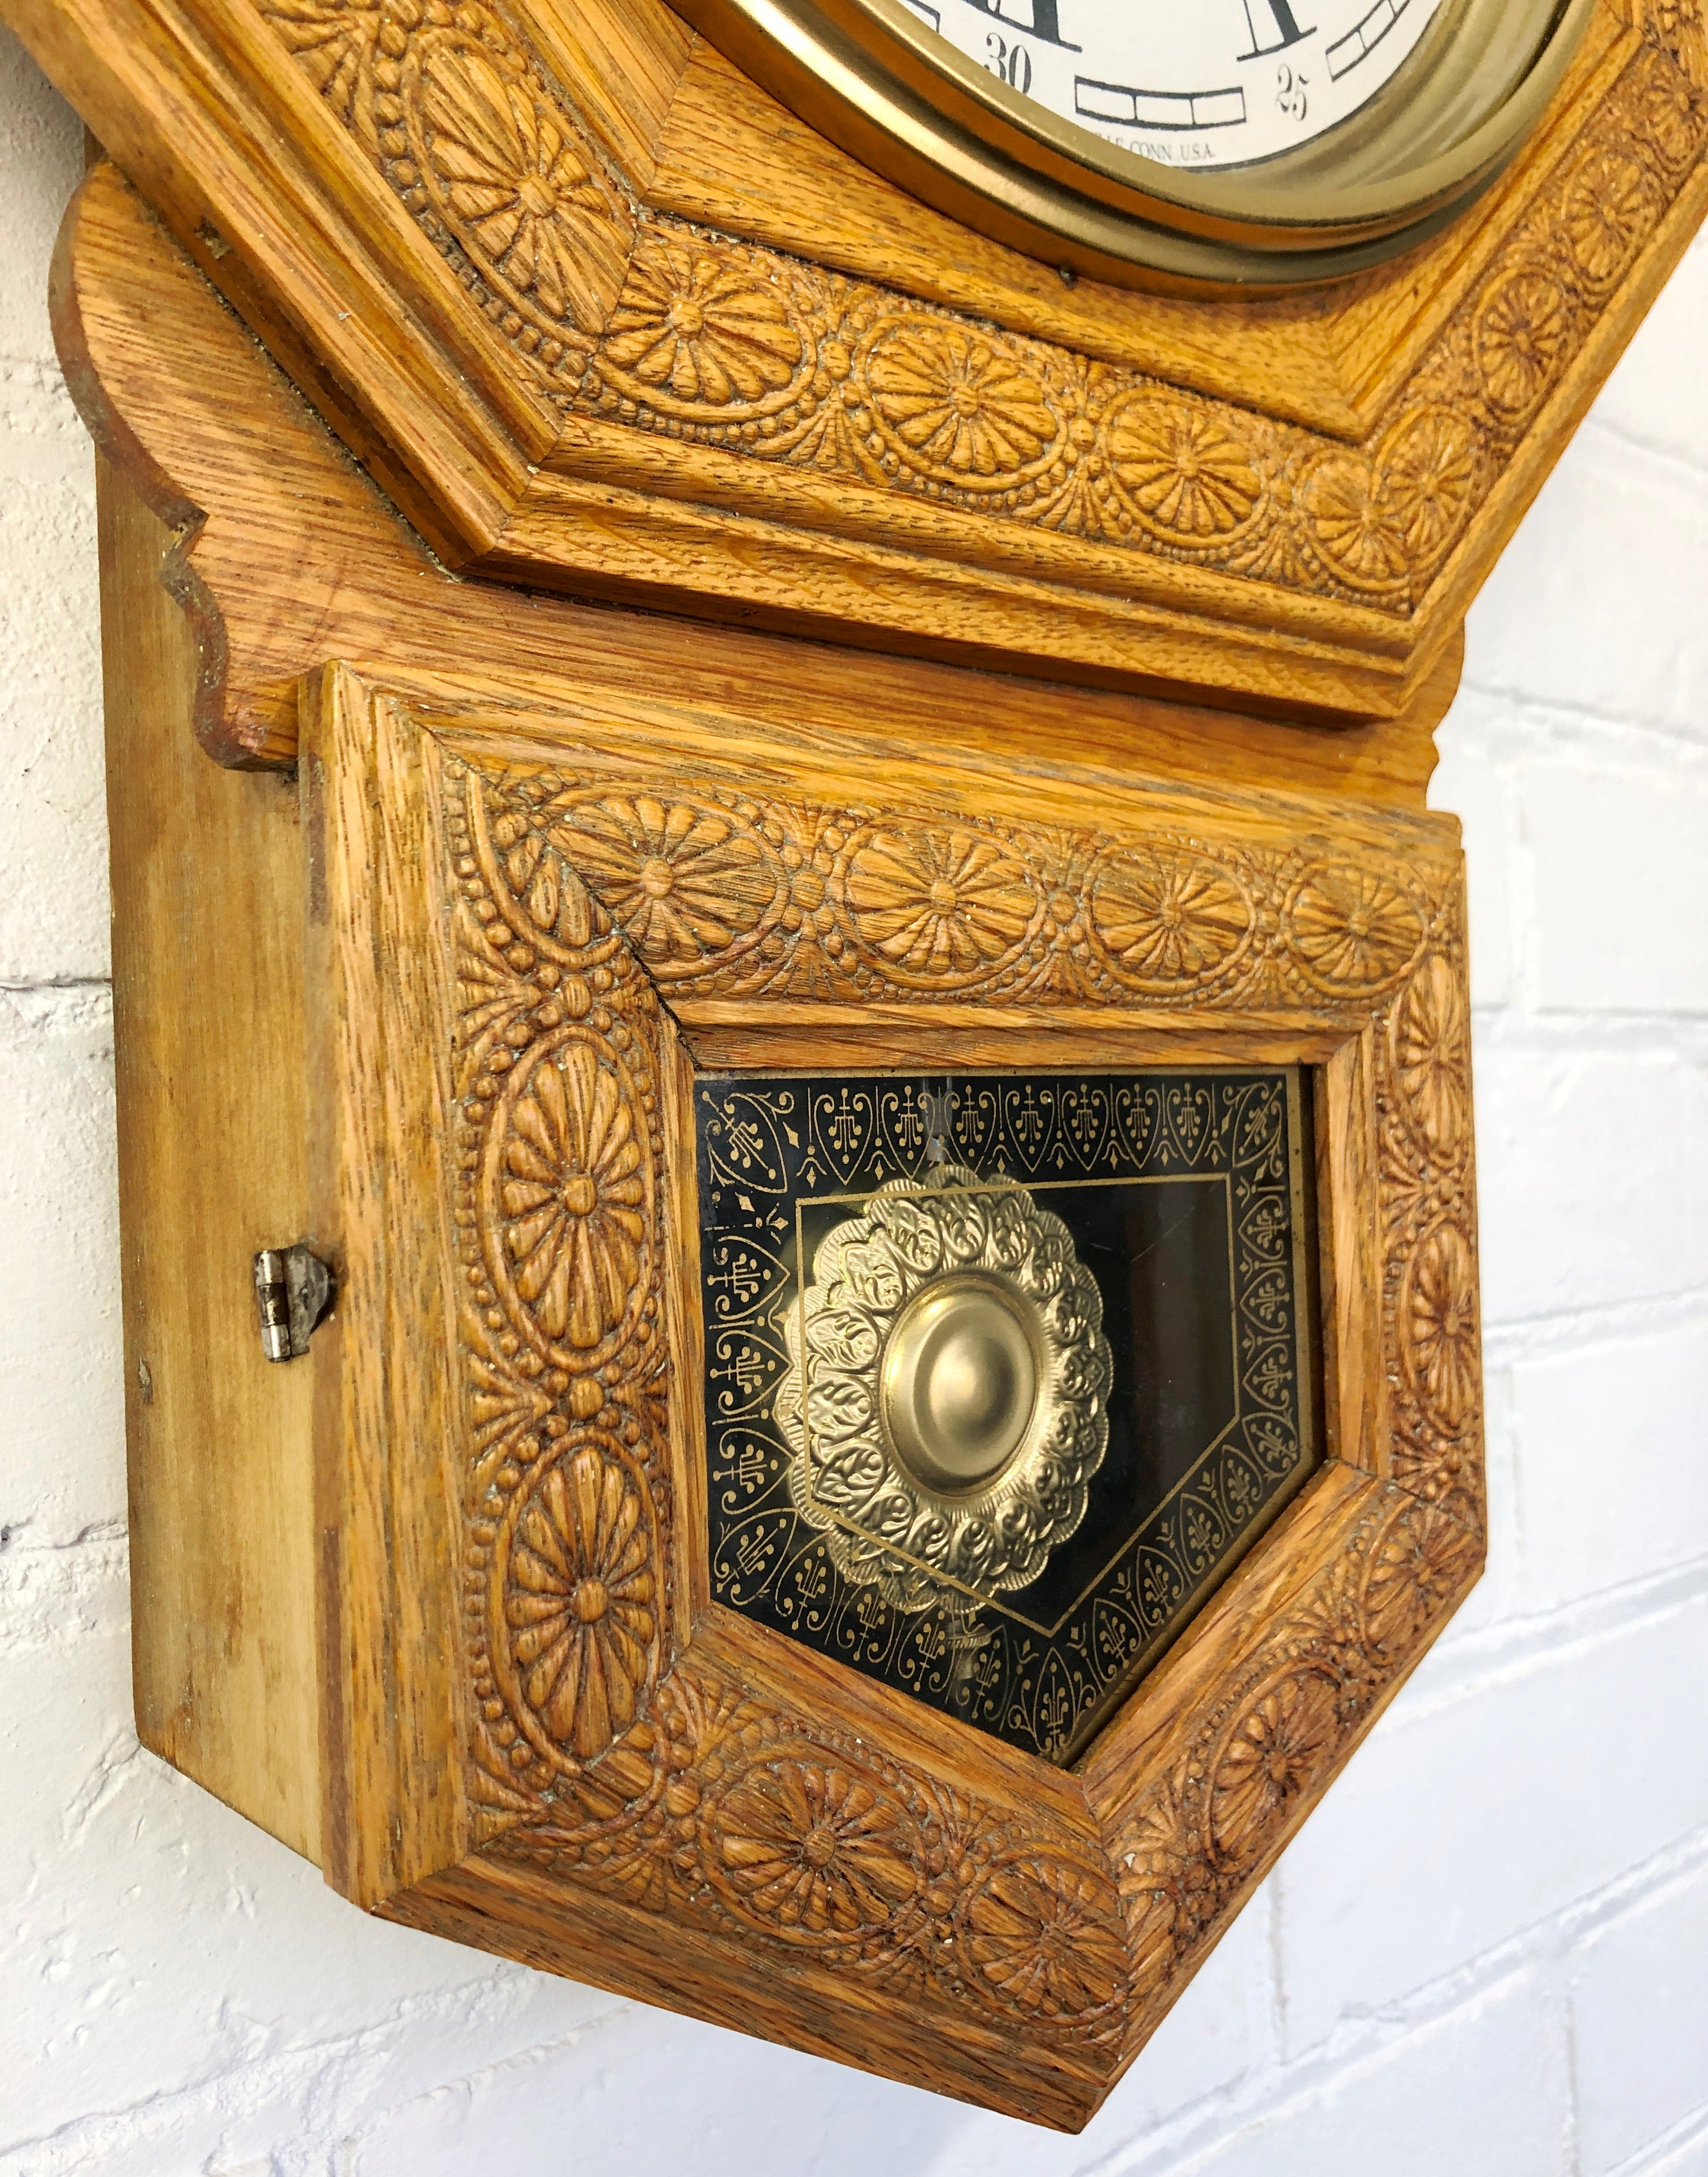 Antique HUGE Welch Octagon Carved Wood Regulator Wall Clock | eXibit collection